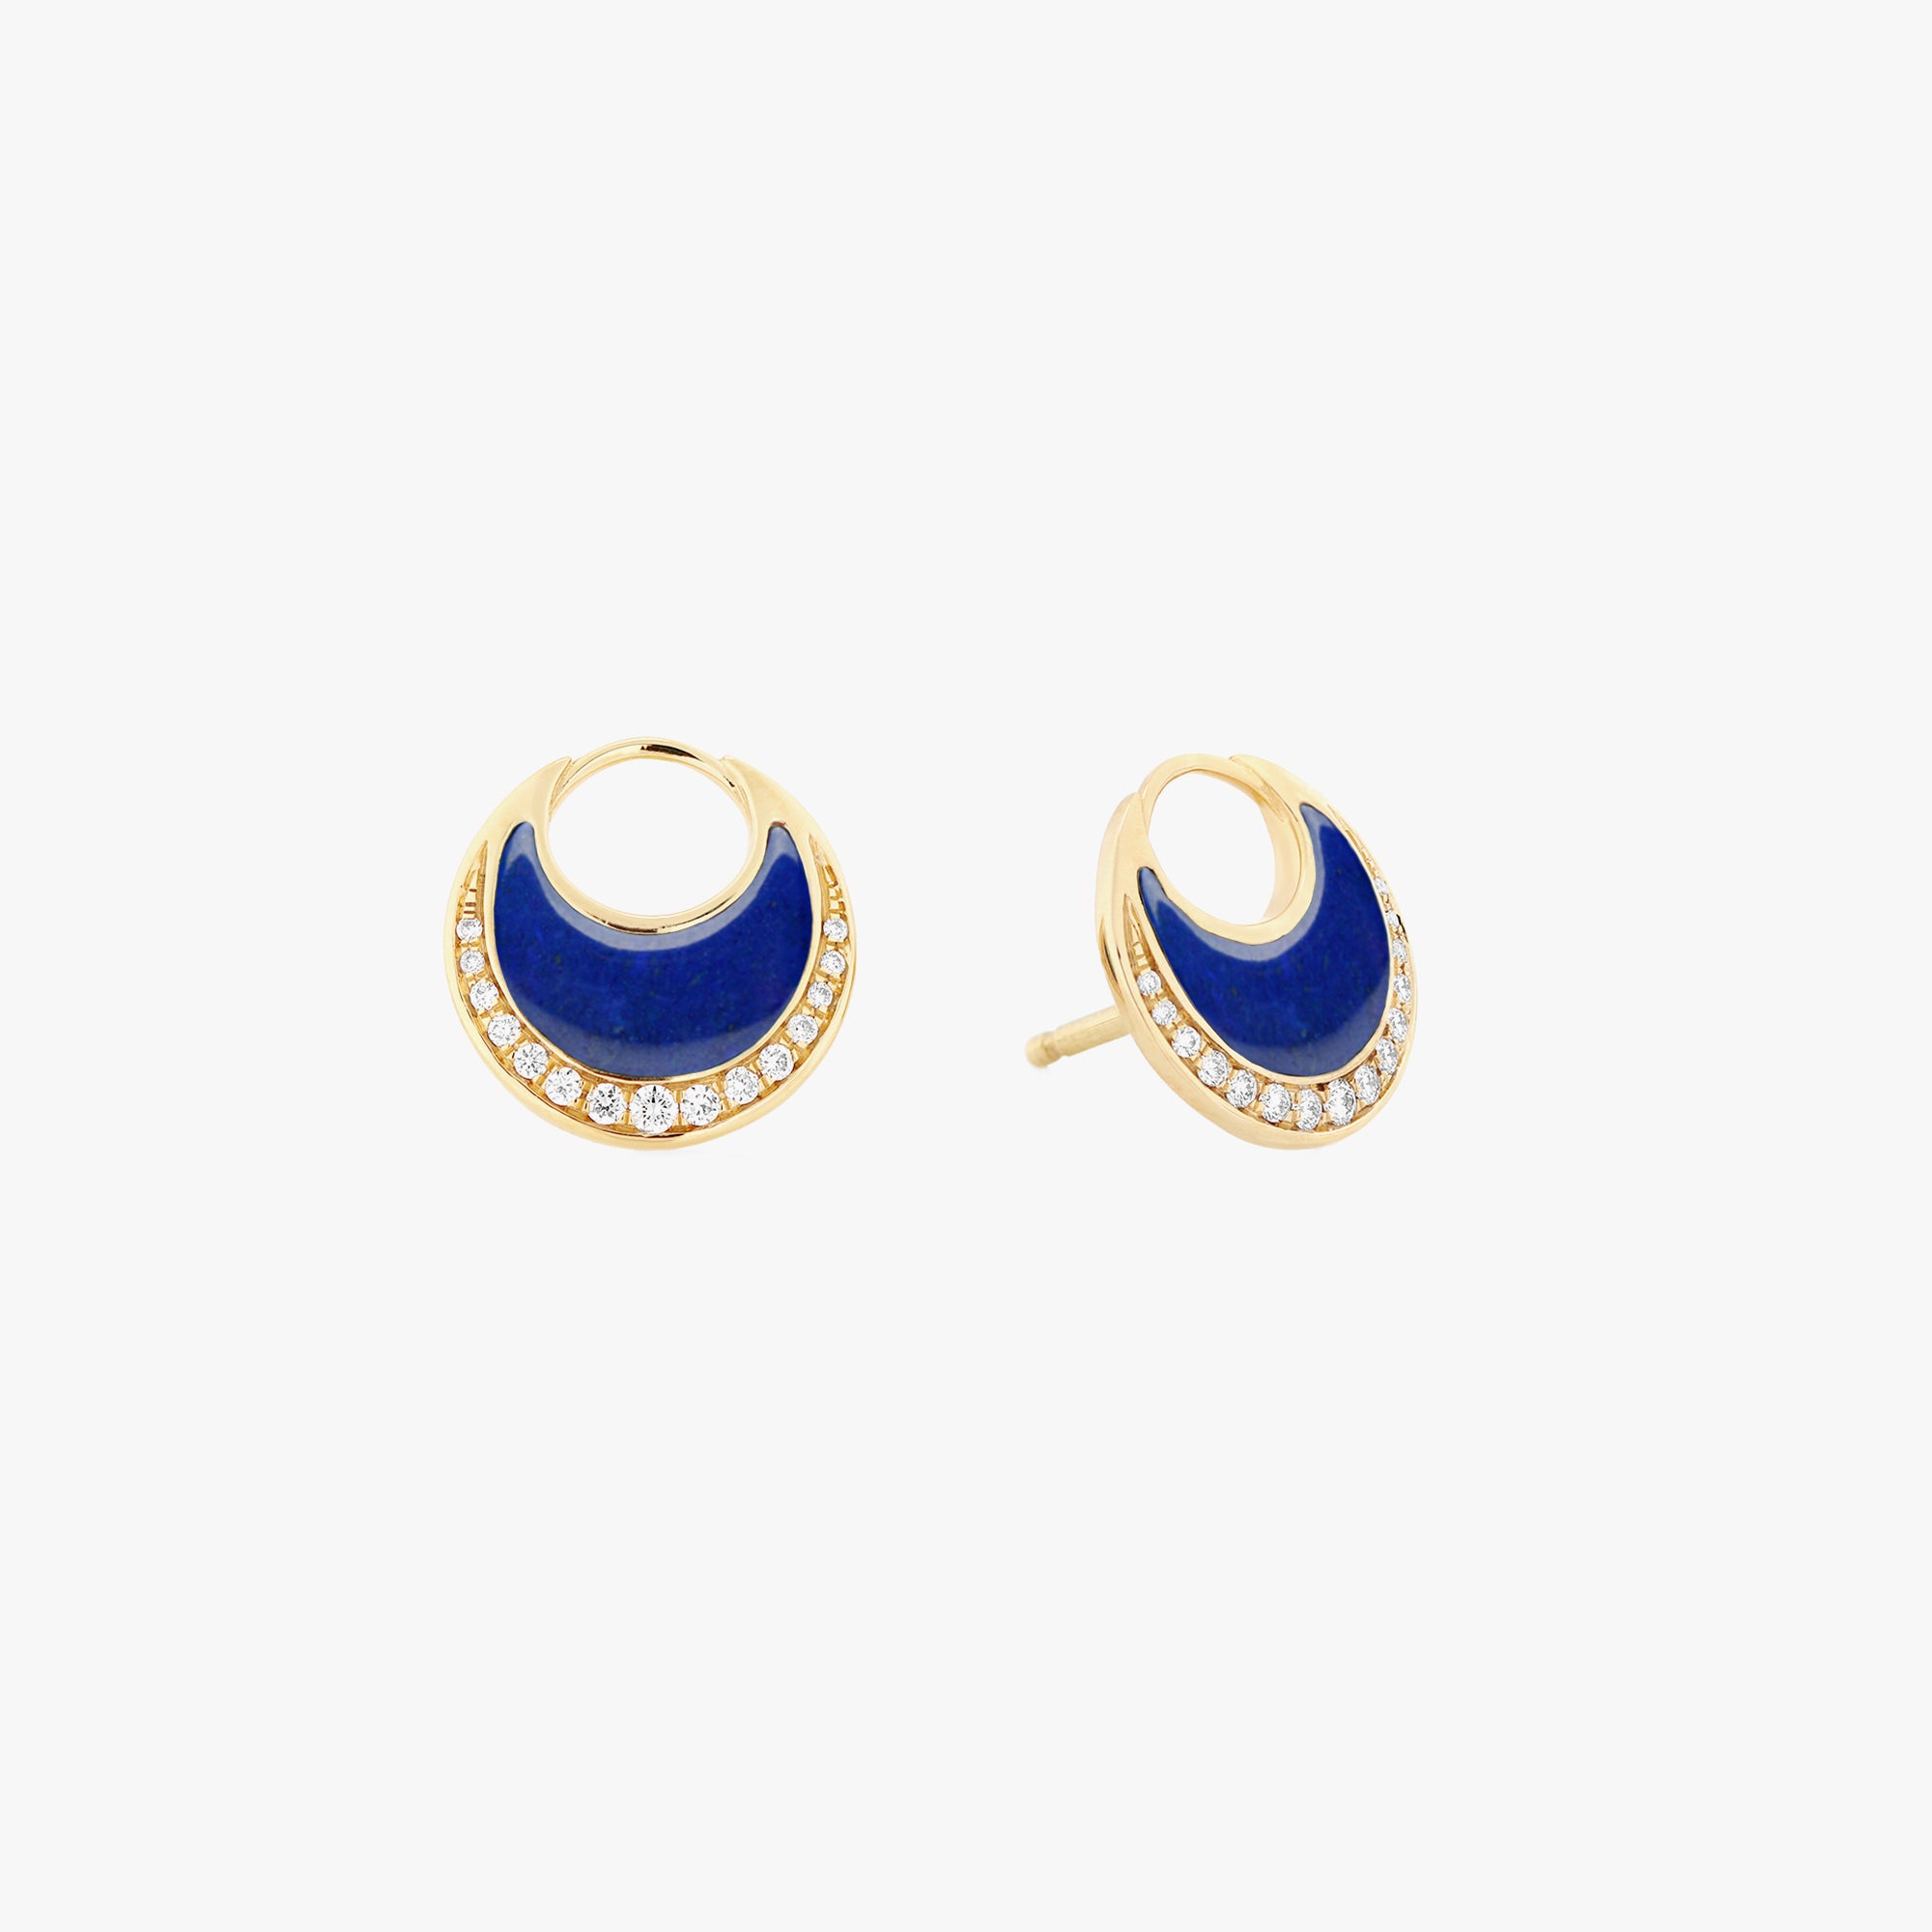 Al Hilal earrings in yellow gold with lapis stone and diamonds